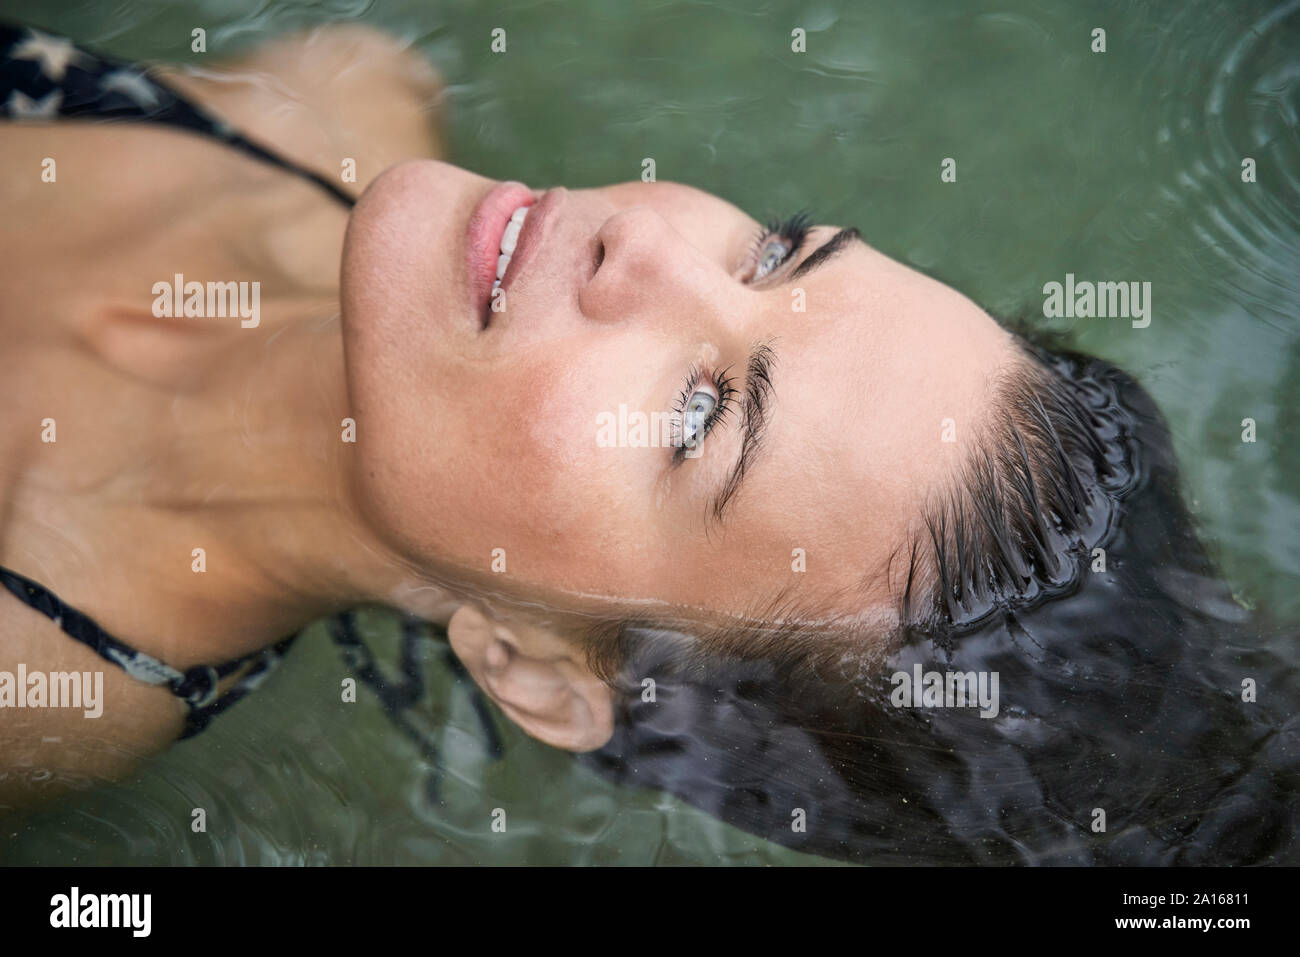 Portrait of woman floating in water Stock Photo